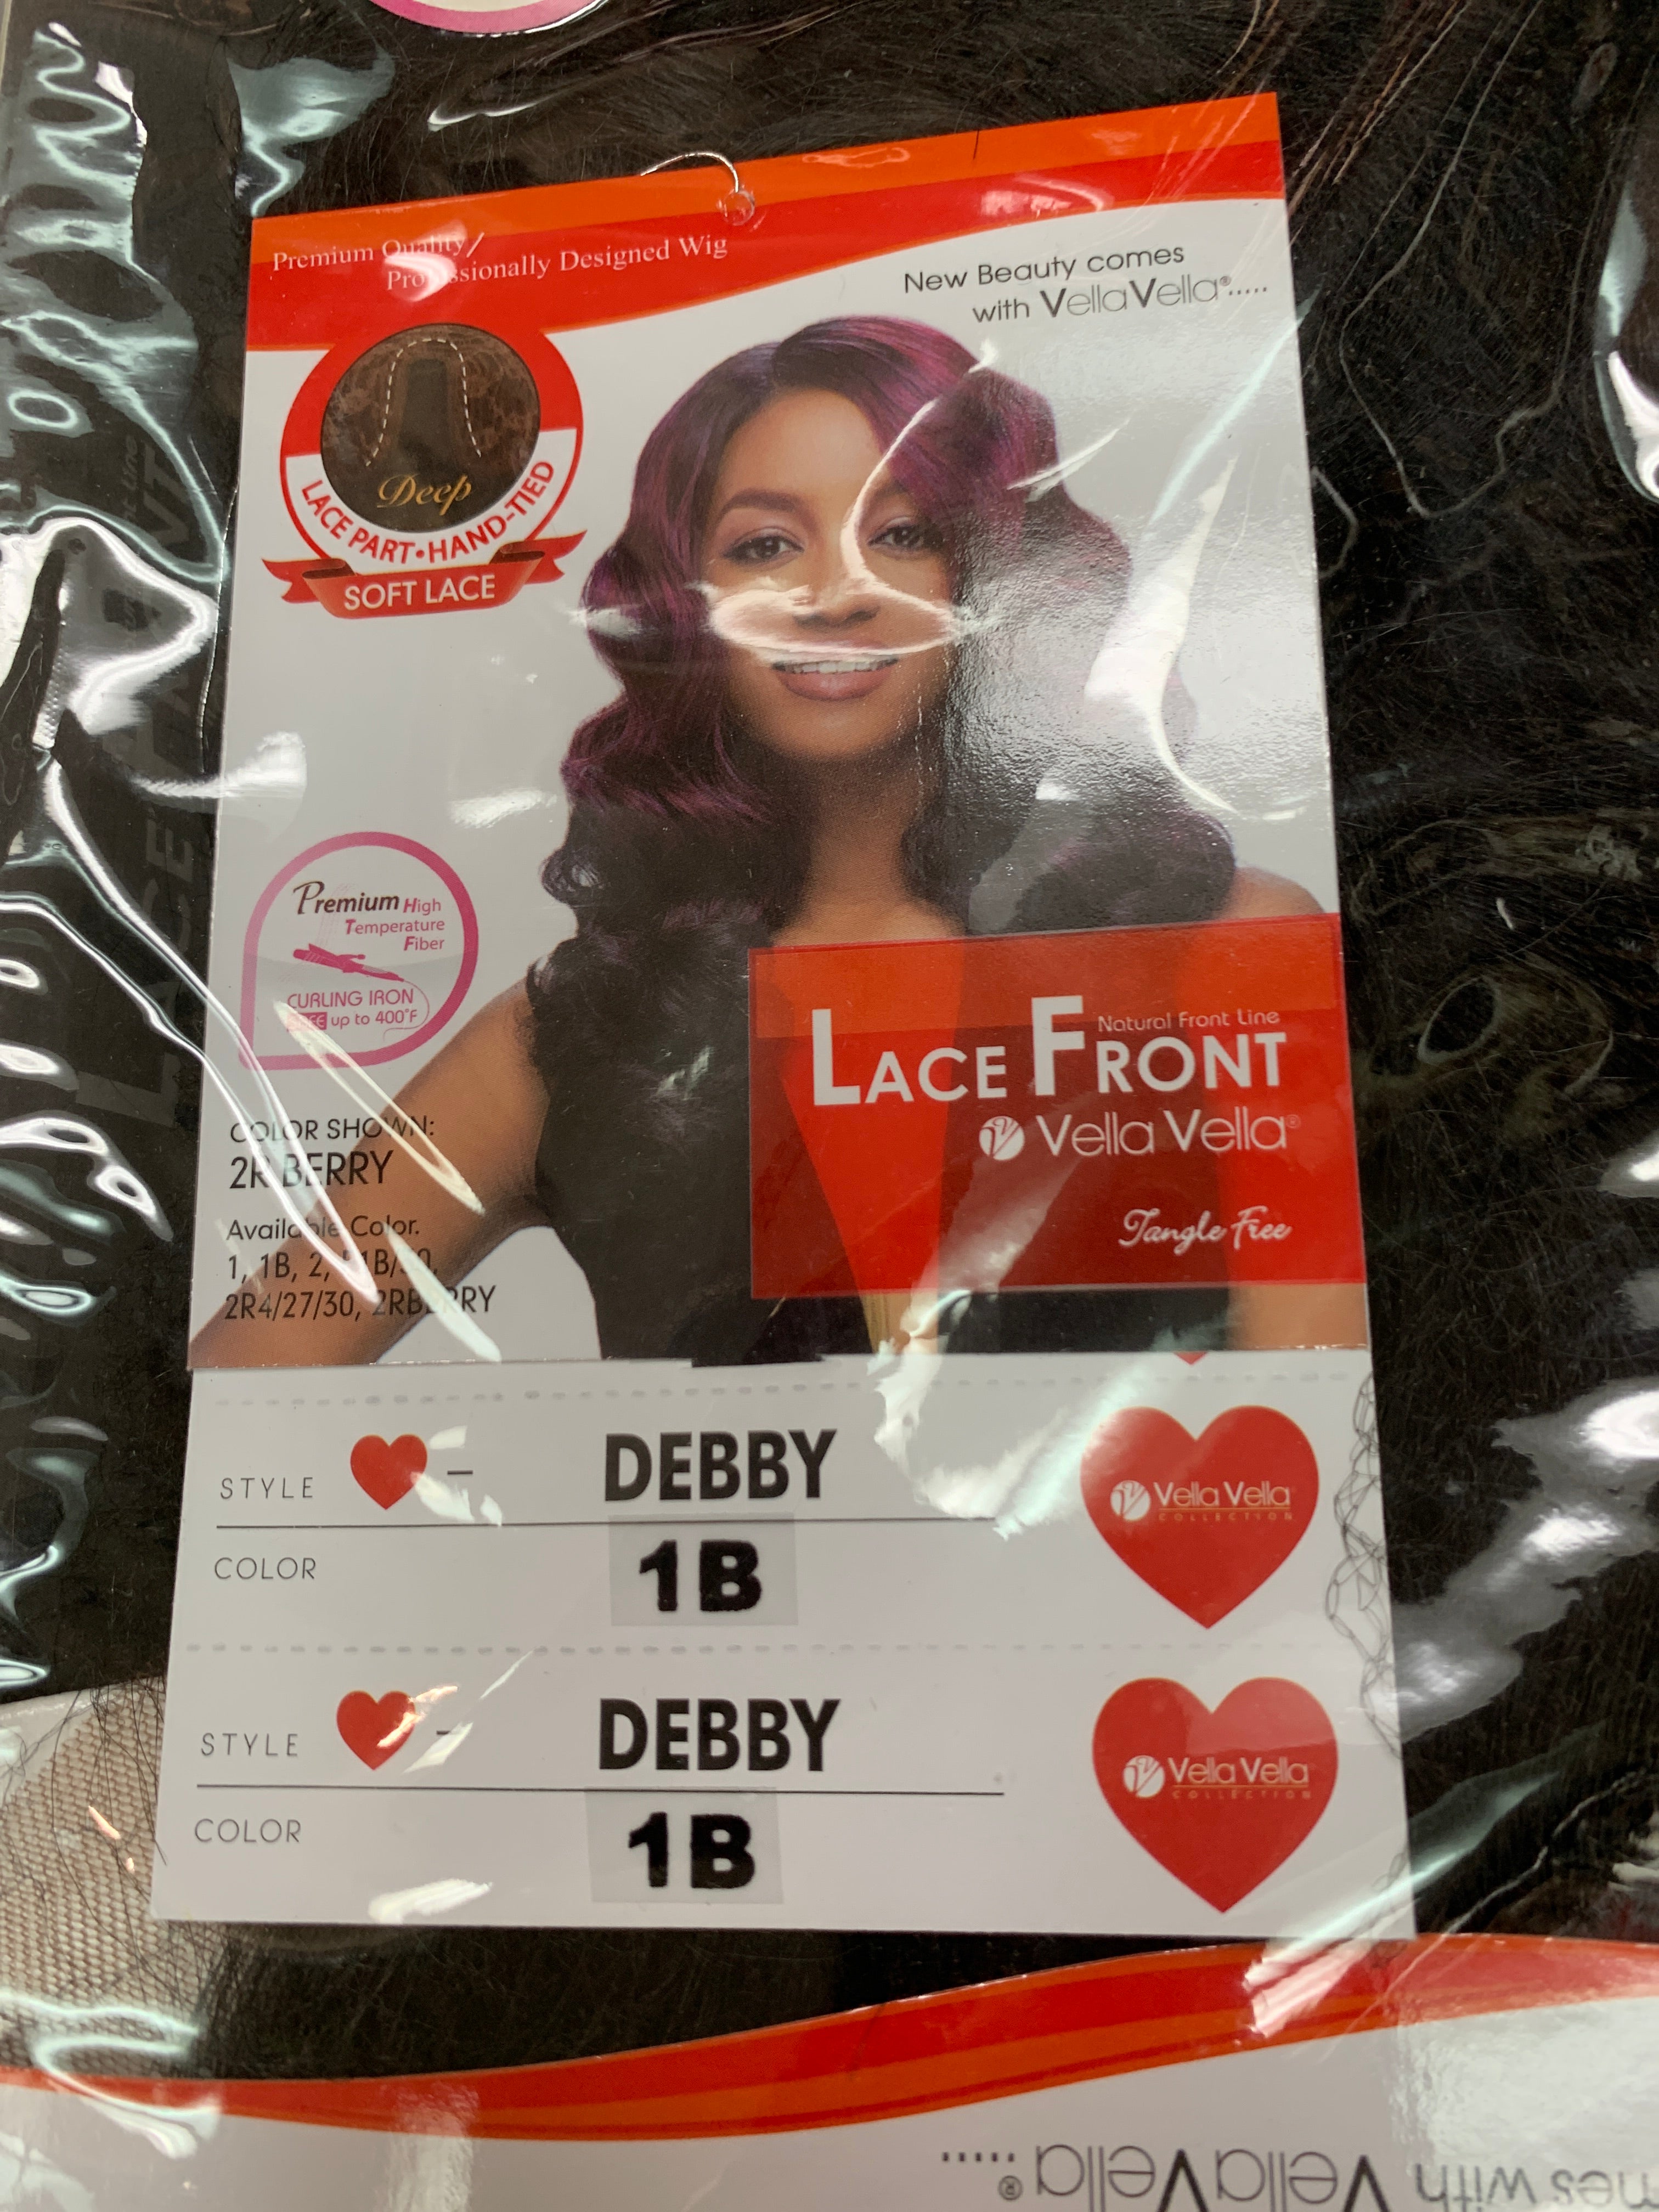 Sensual lace front Debby